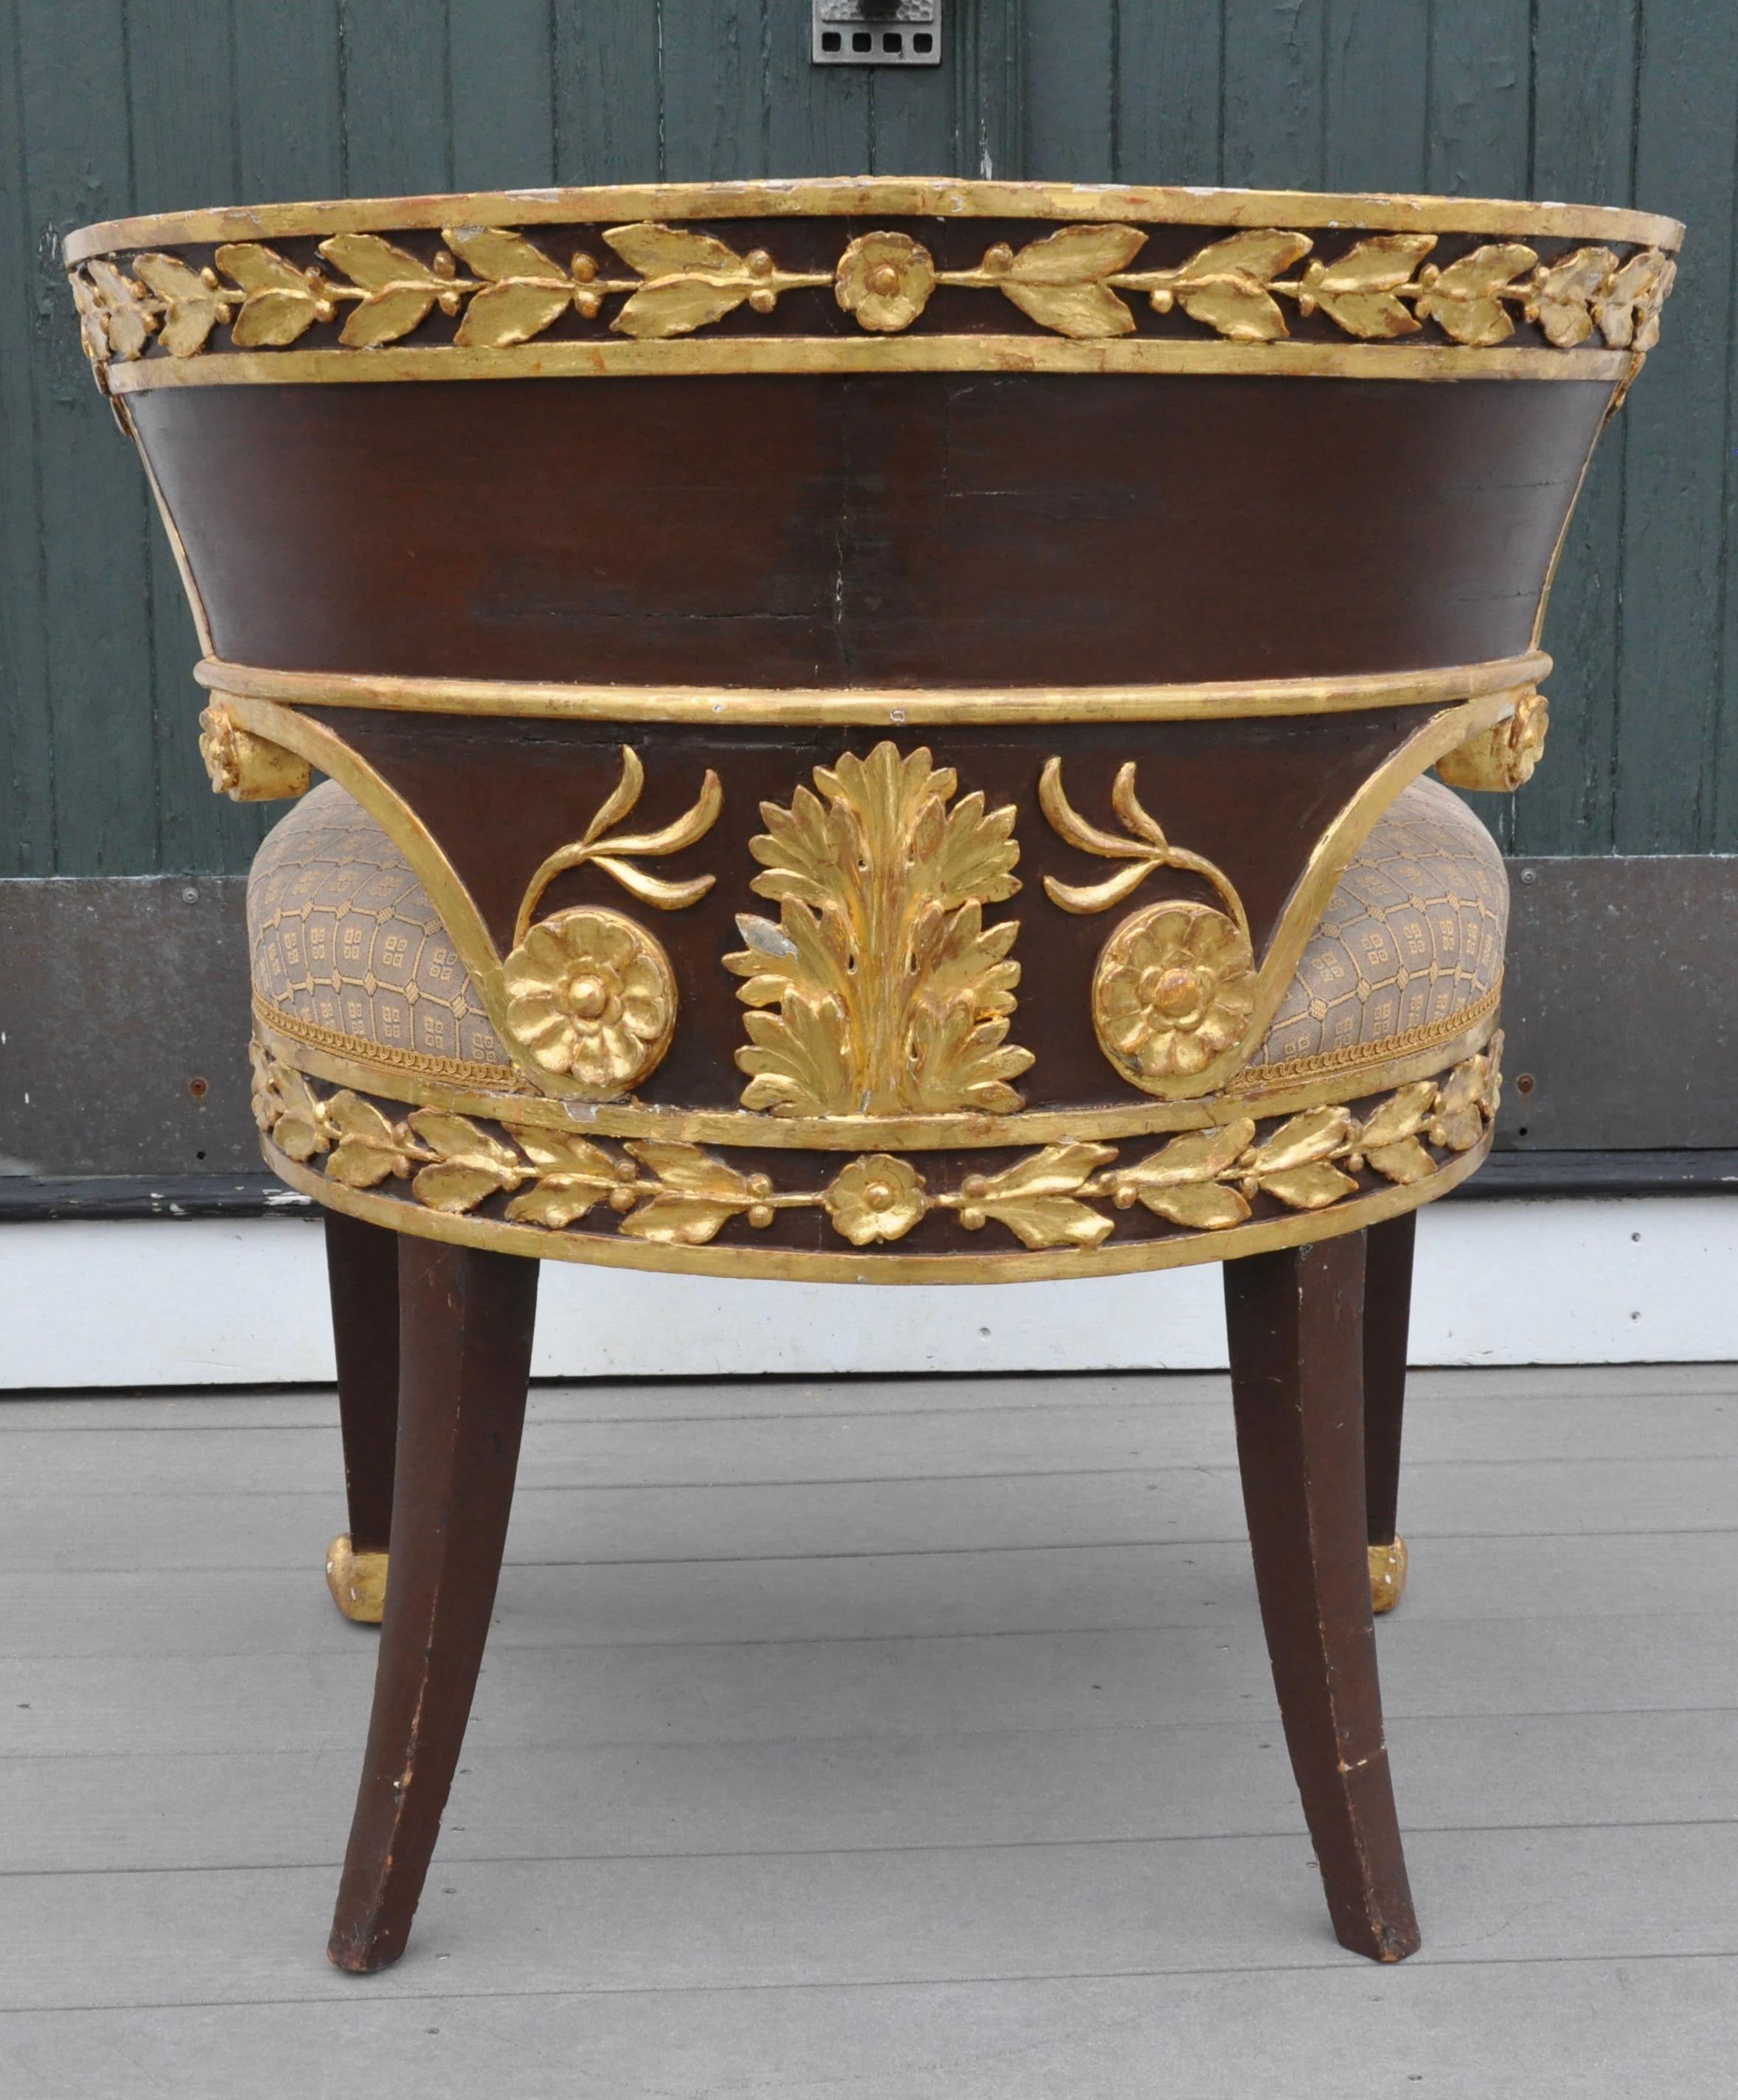 Period Early 19th Century Russian Giltwood and Painted Armchair or Bergere. In style of Rossi. Incredible proportion and size. Good size for modern sitting. Gilding over original gilt. Stable and supportive. 

A true masterpiece.